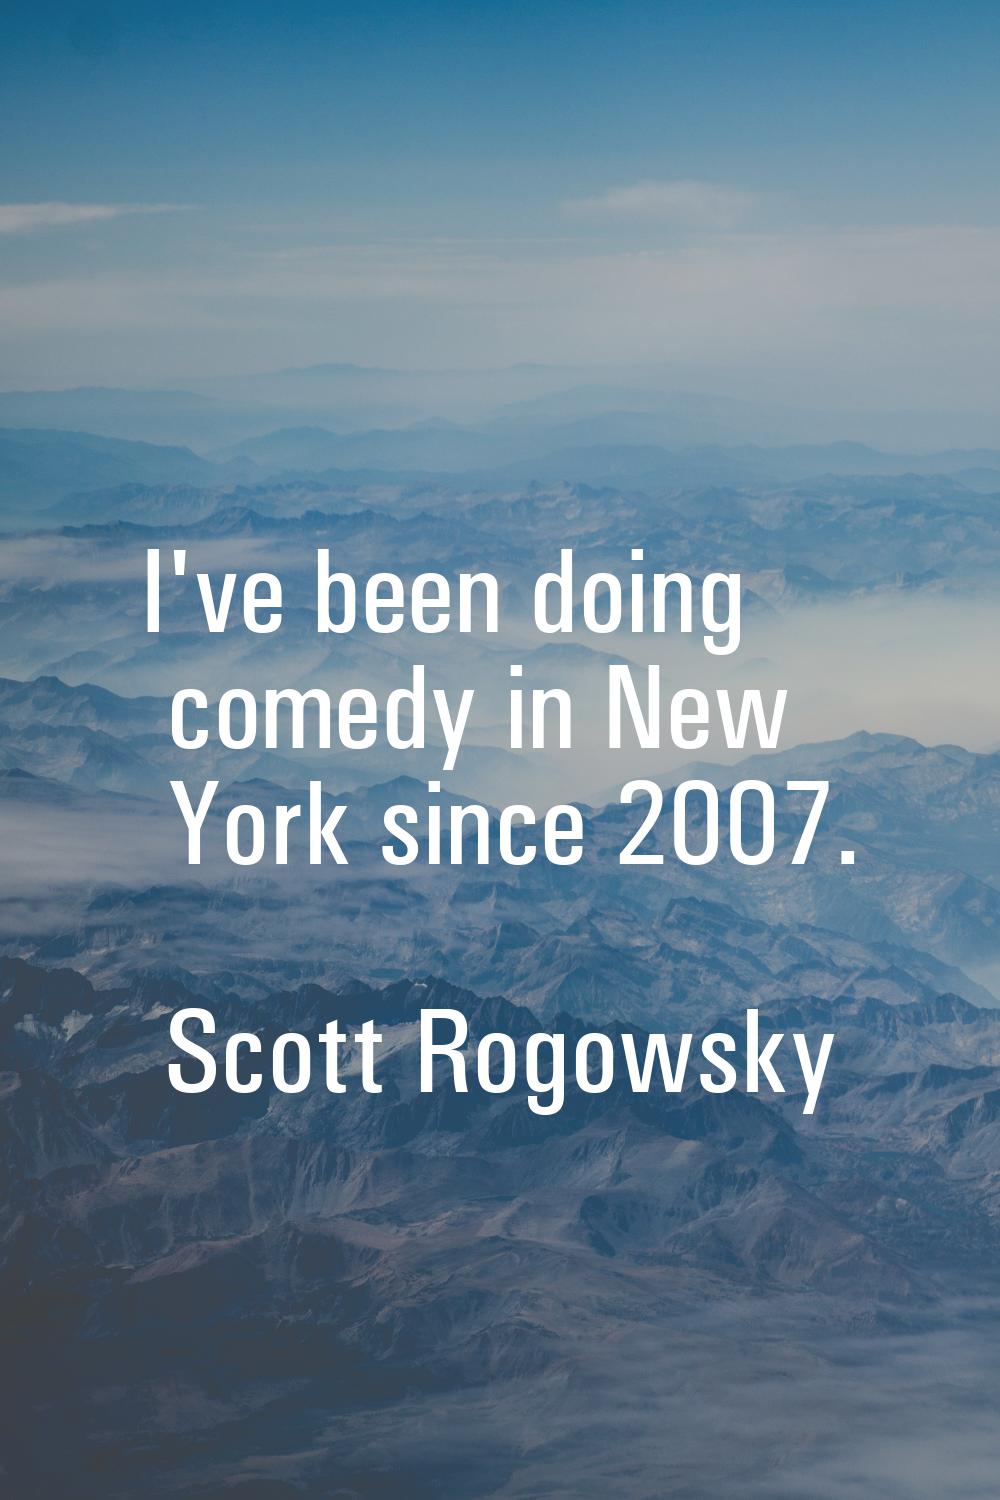 I've been doing comedy in New York since 2007.